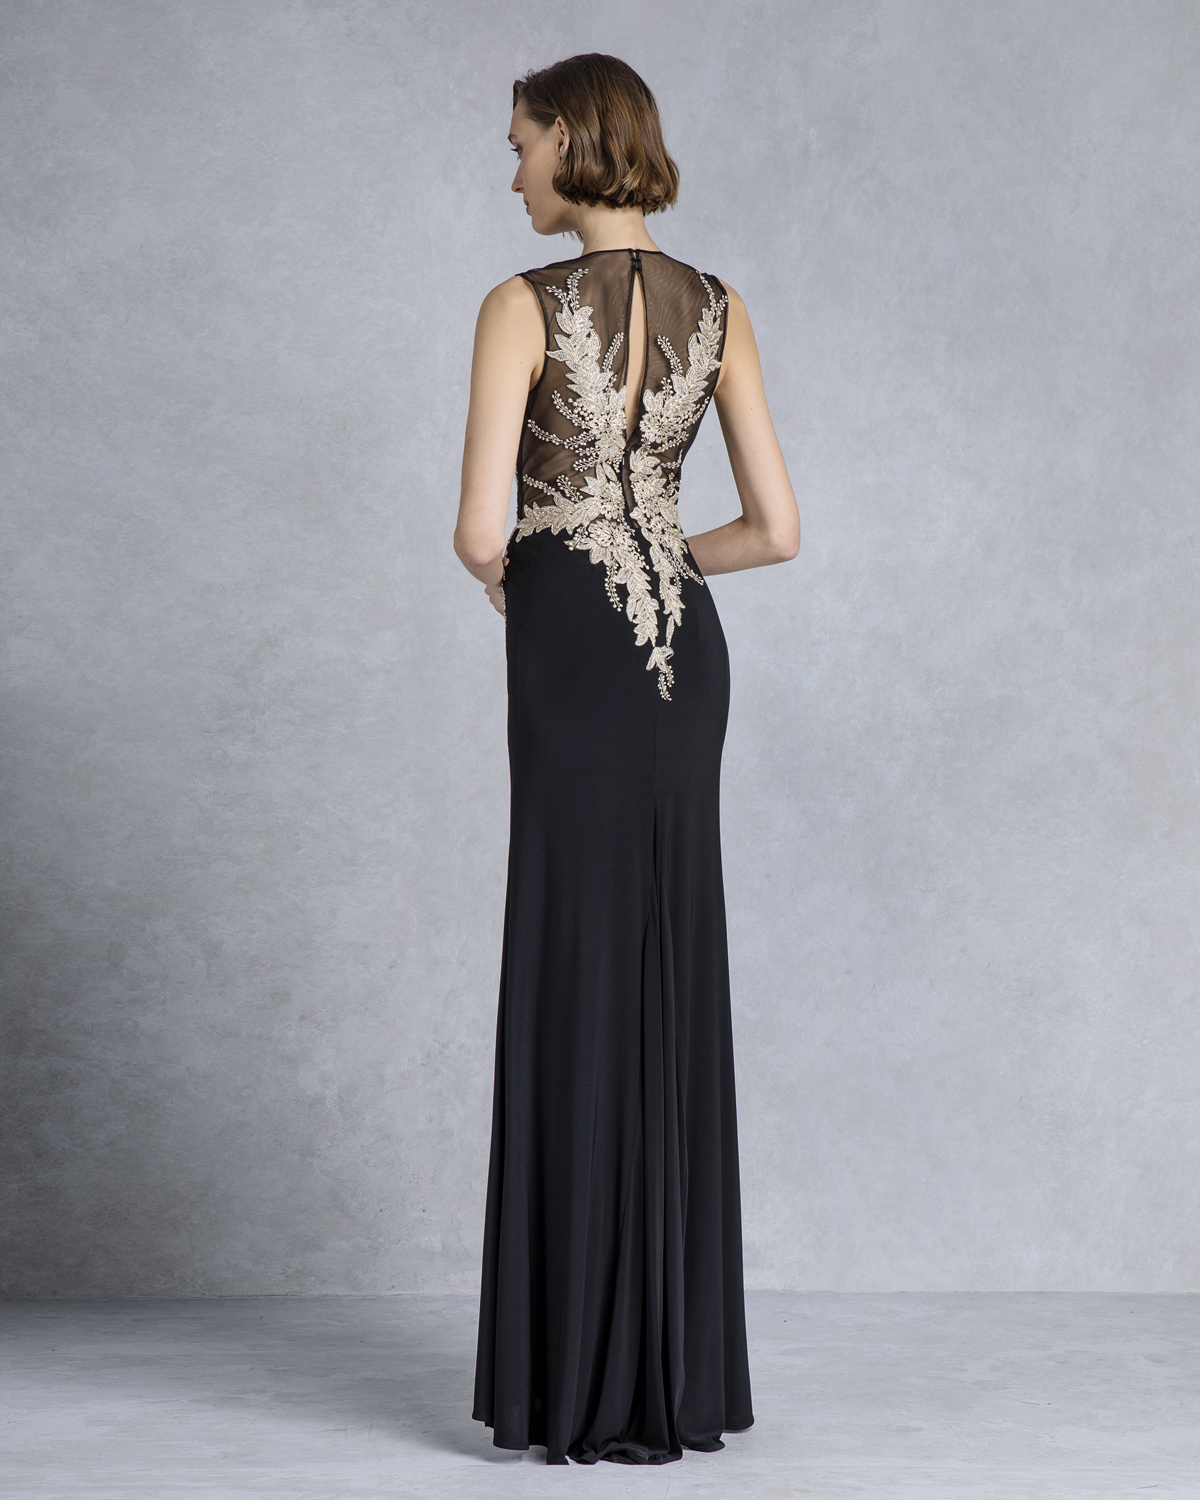 Long evening beaded dress with gold lace